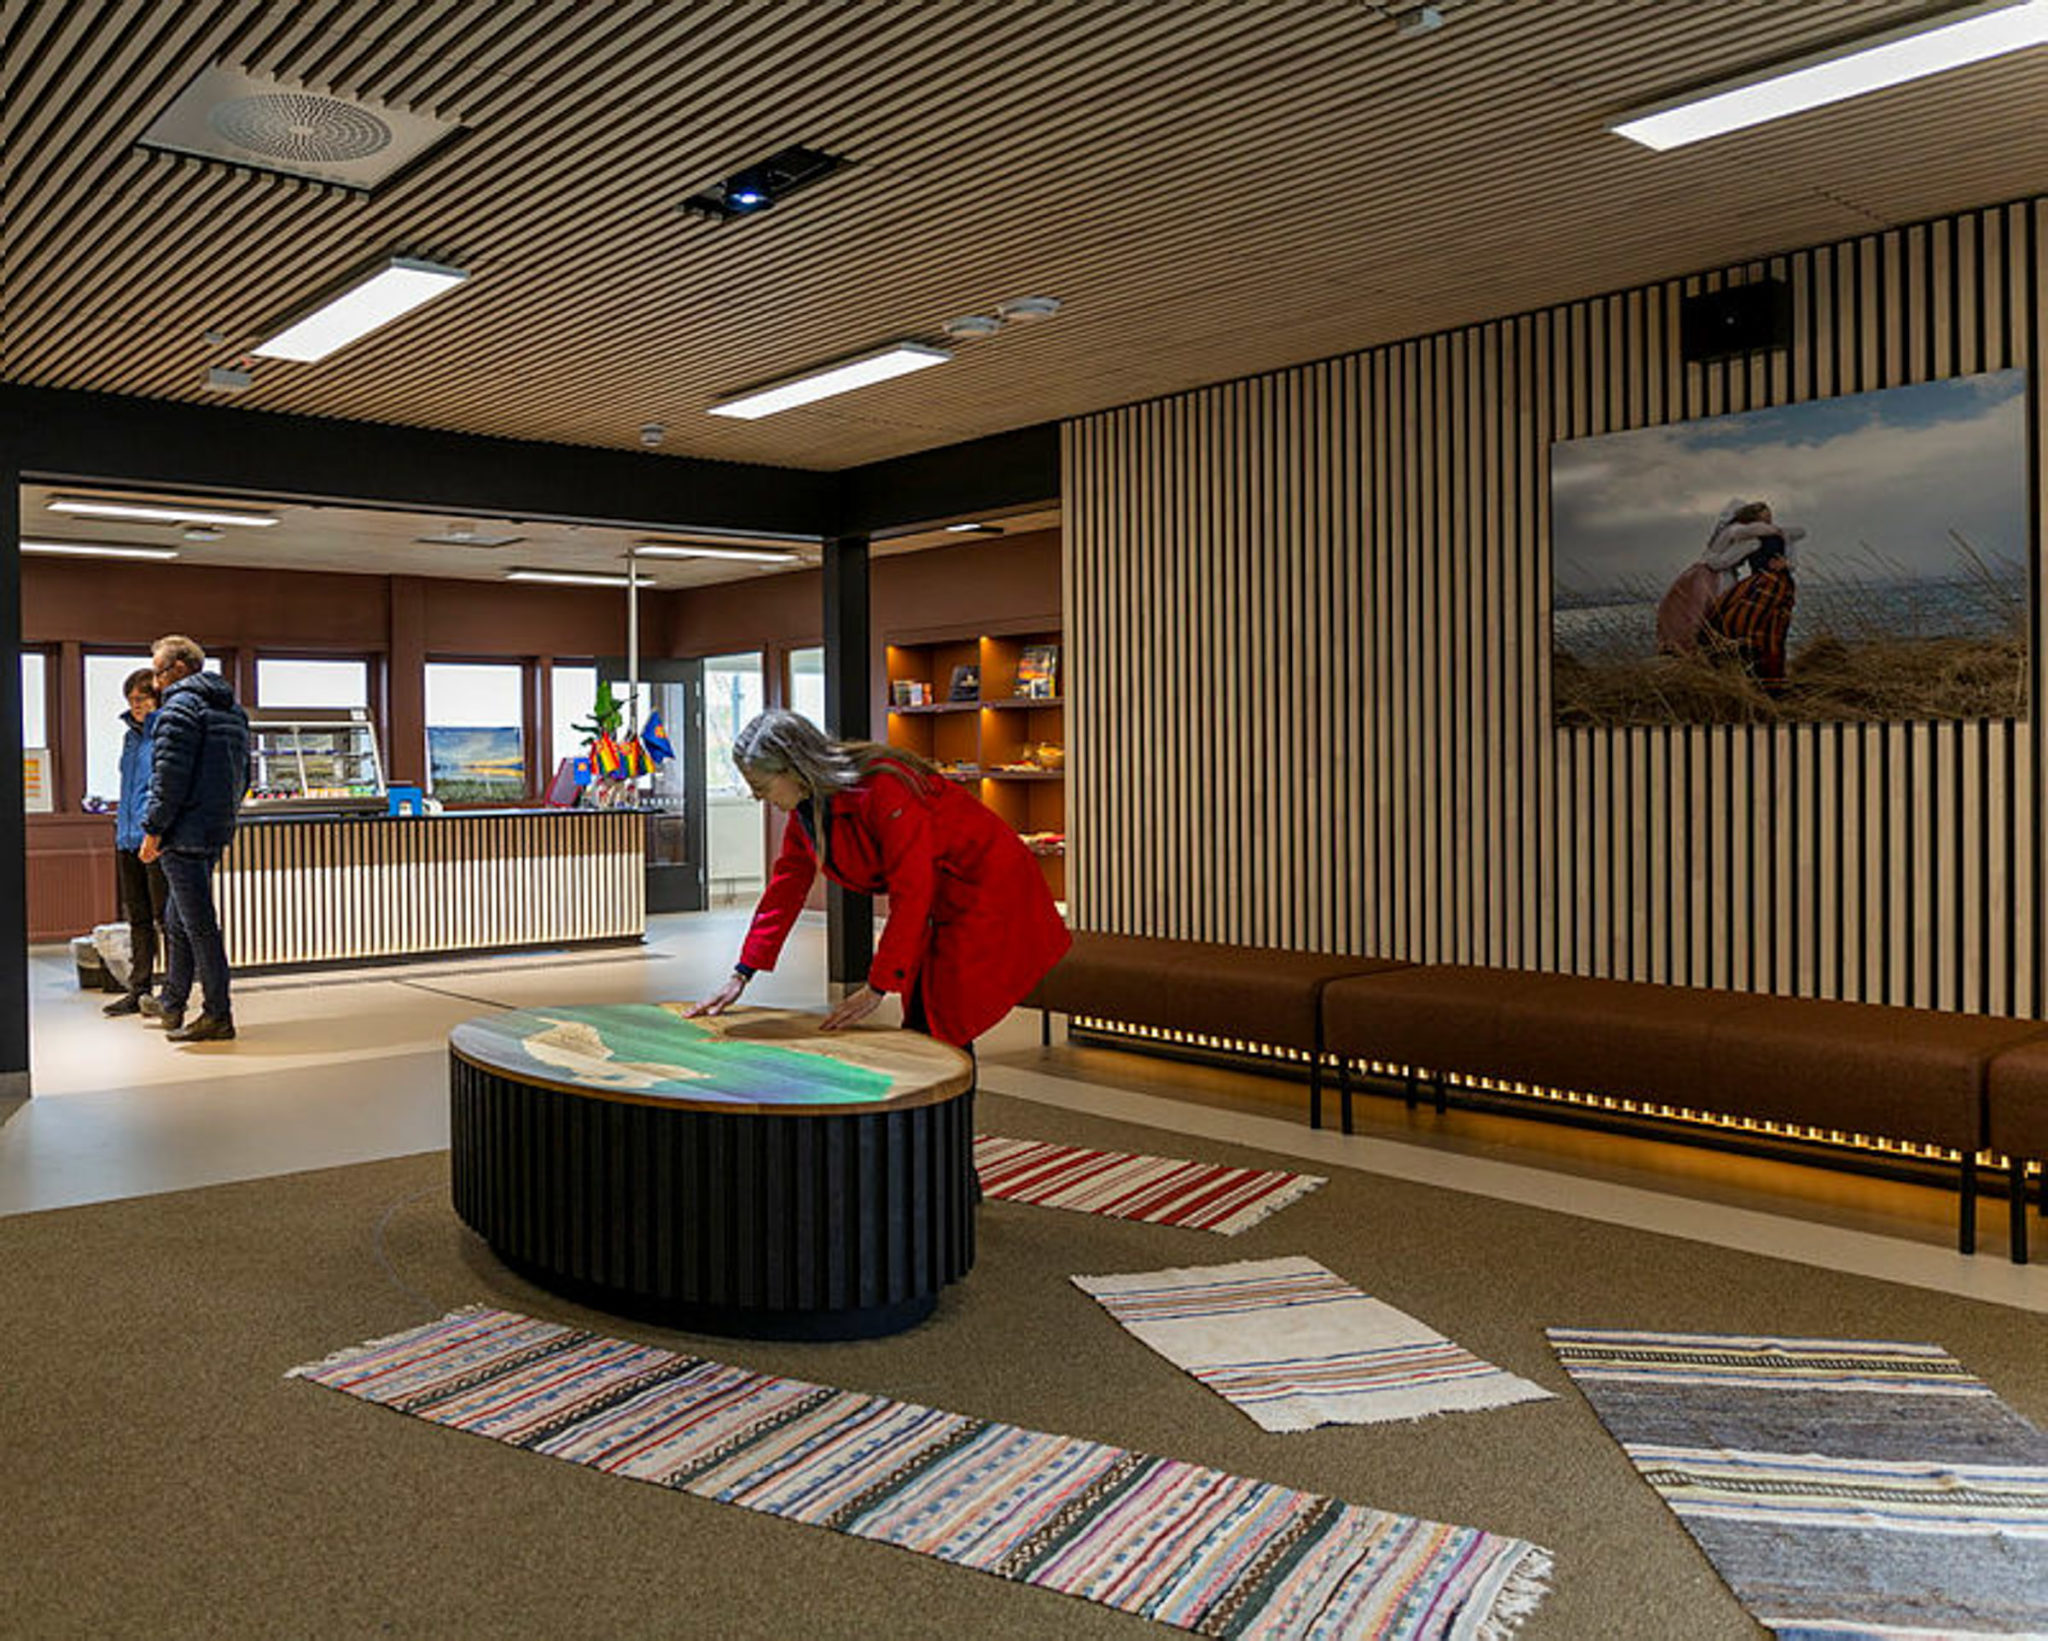 Learn about the history of Vadsø on a fun table in the foyer. Do note the rugs © Vadsø museum - Ruija kvenmuseum